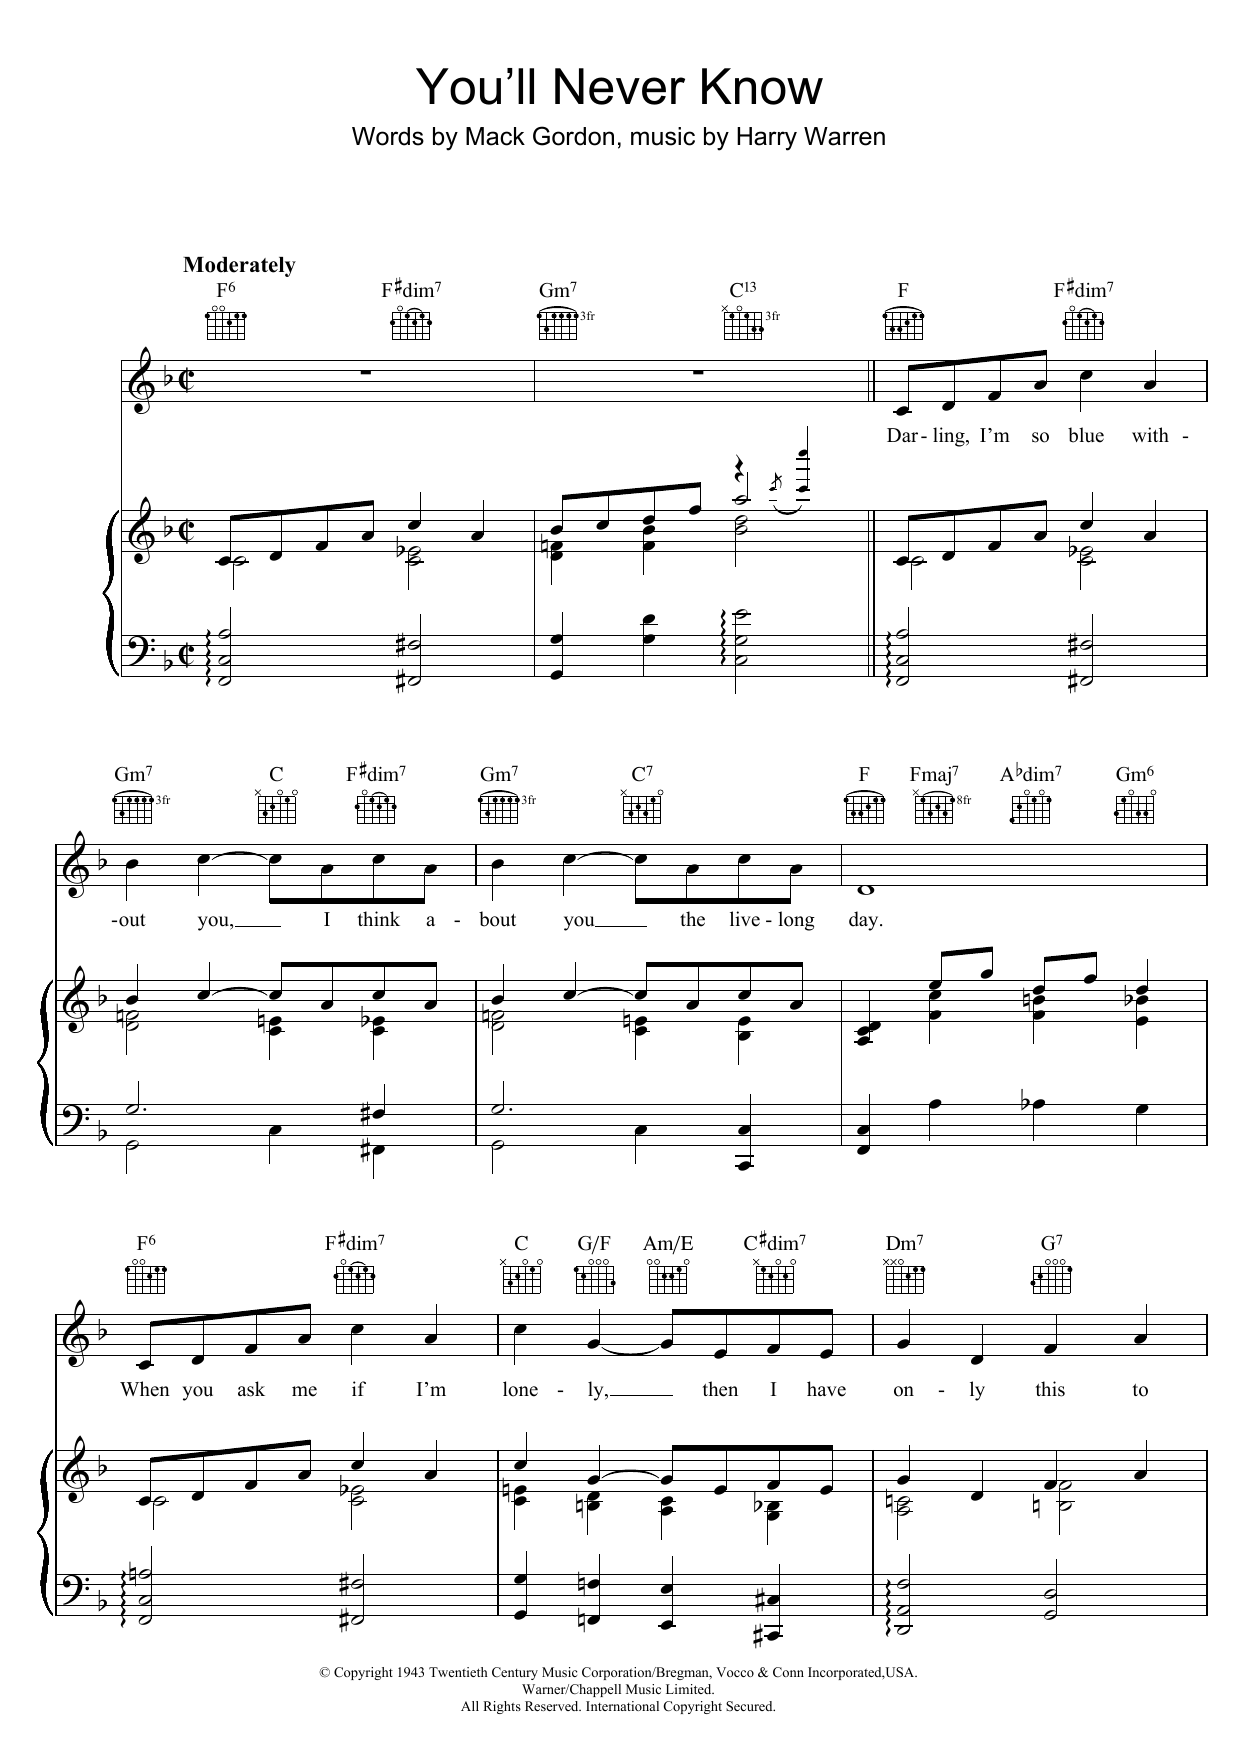 Download Mack Gordon You'll Never Know Sheet Music